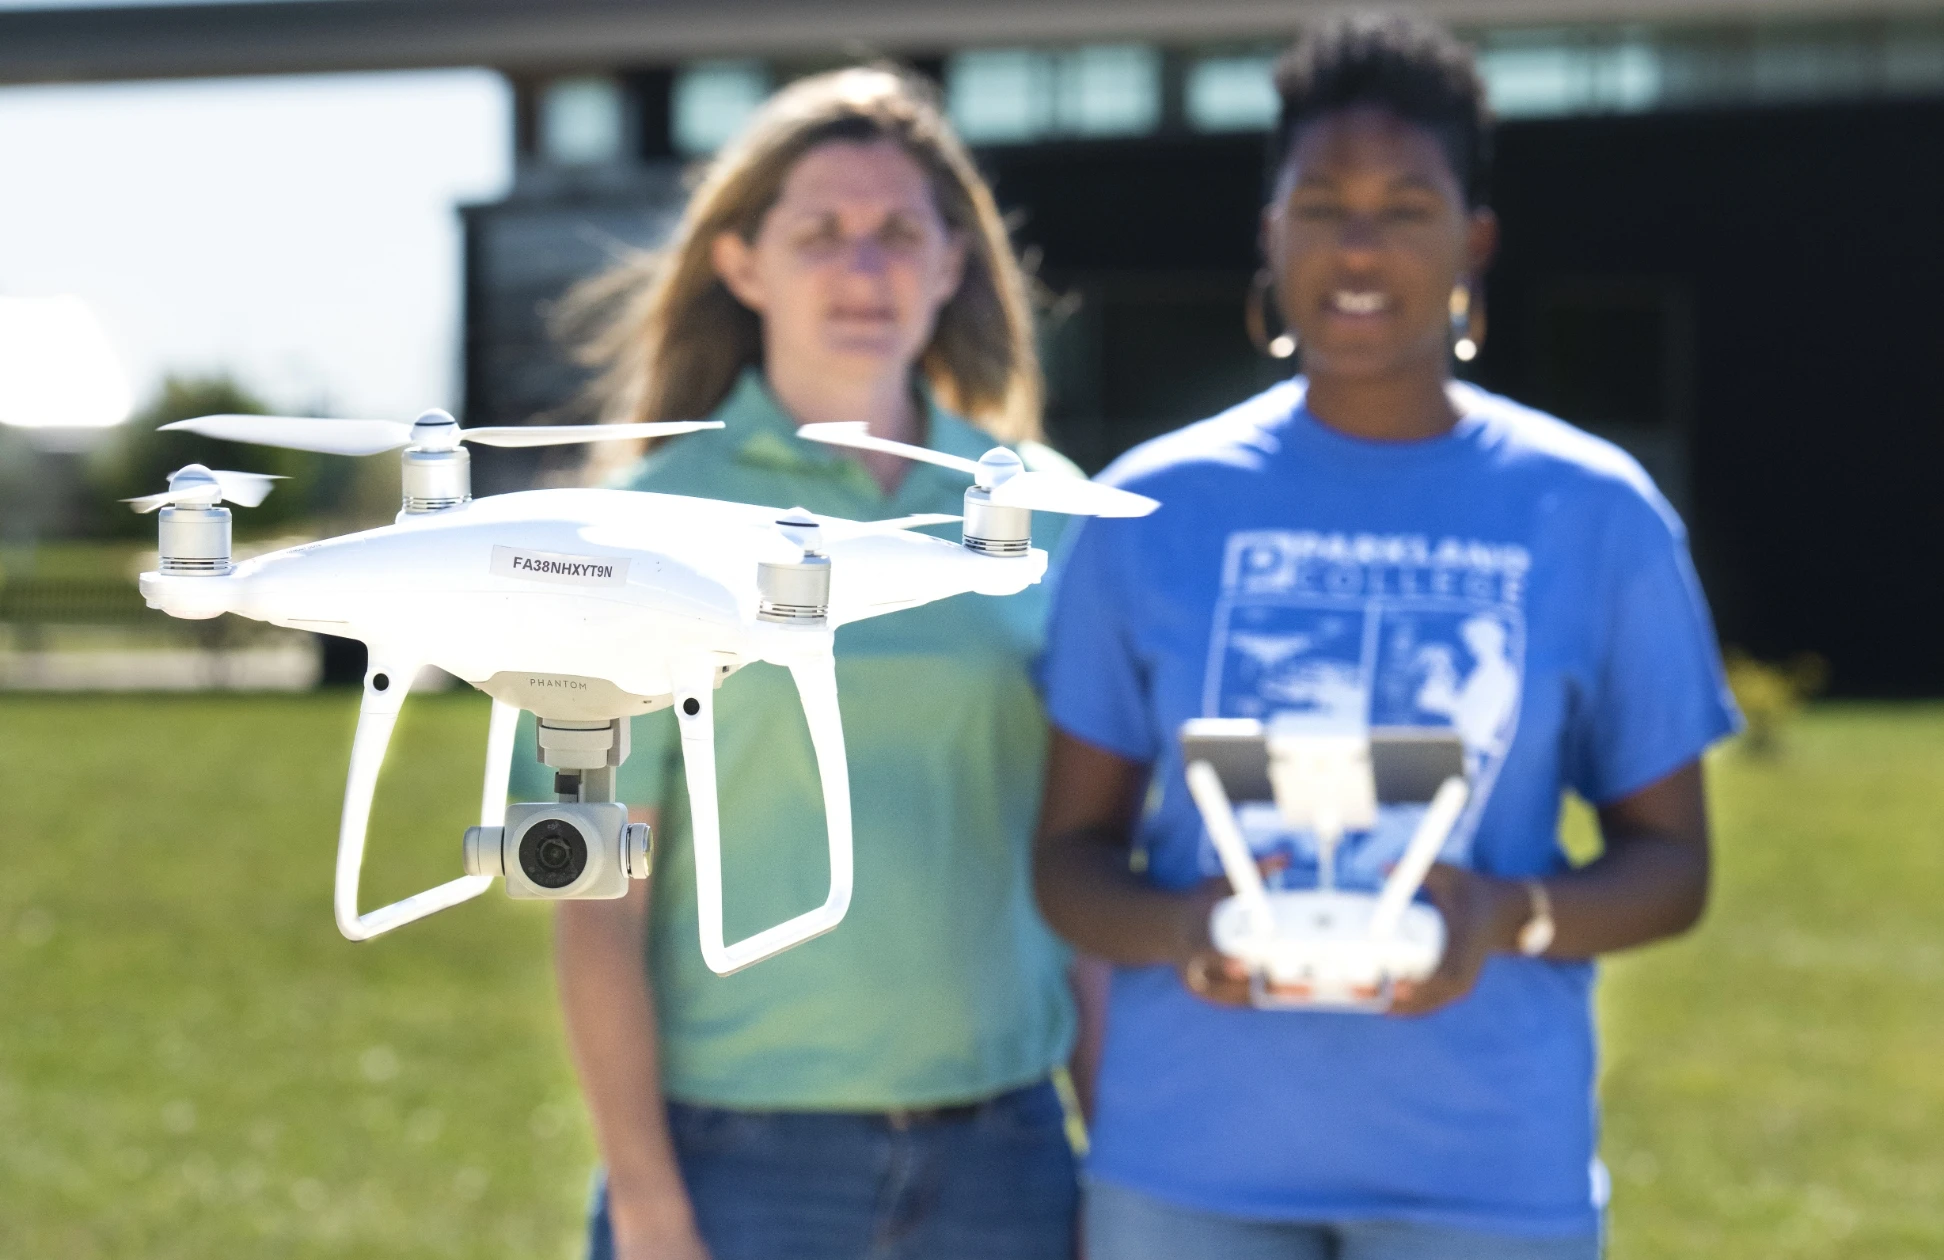 A photo of two people holding a drone.